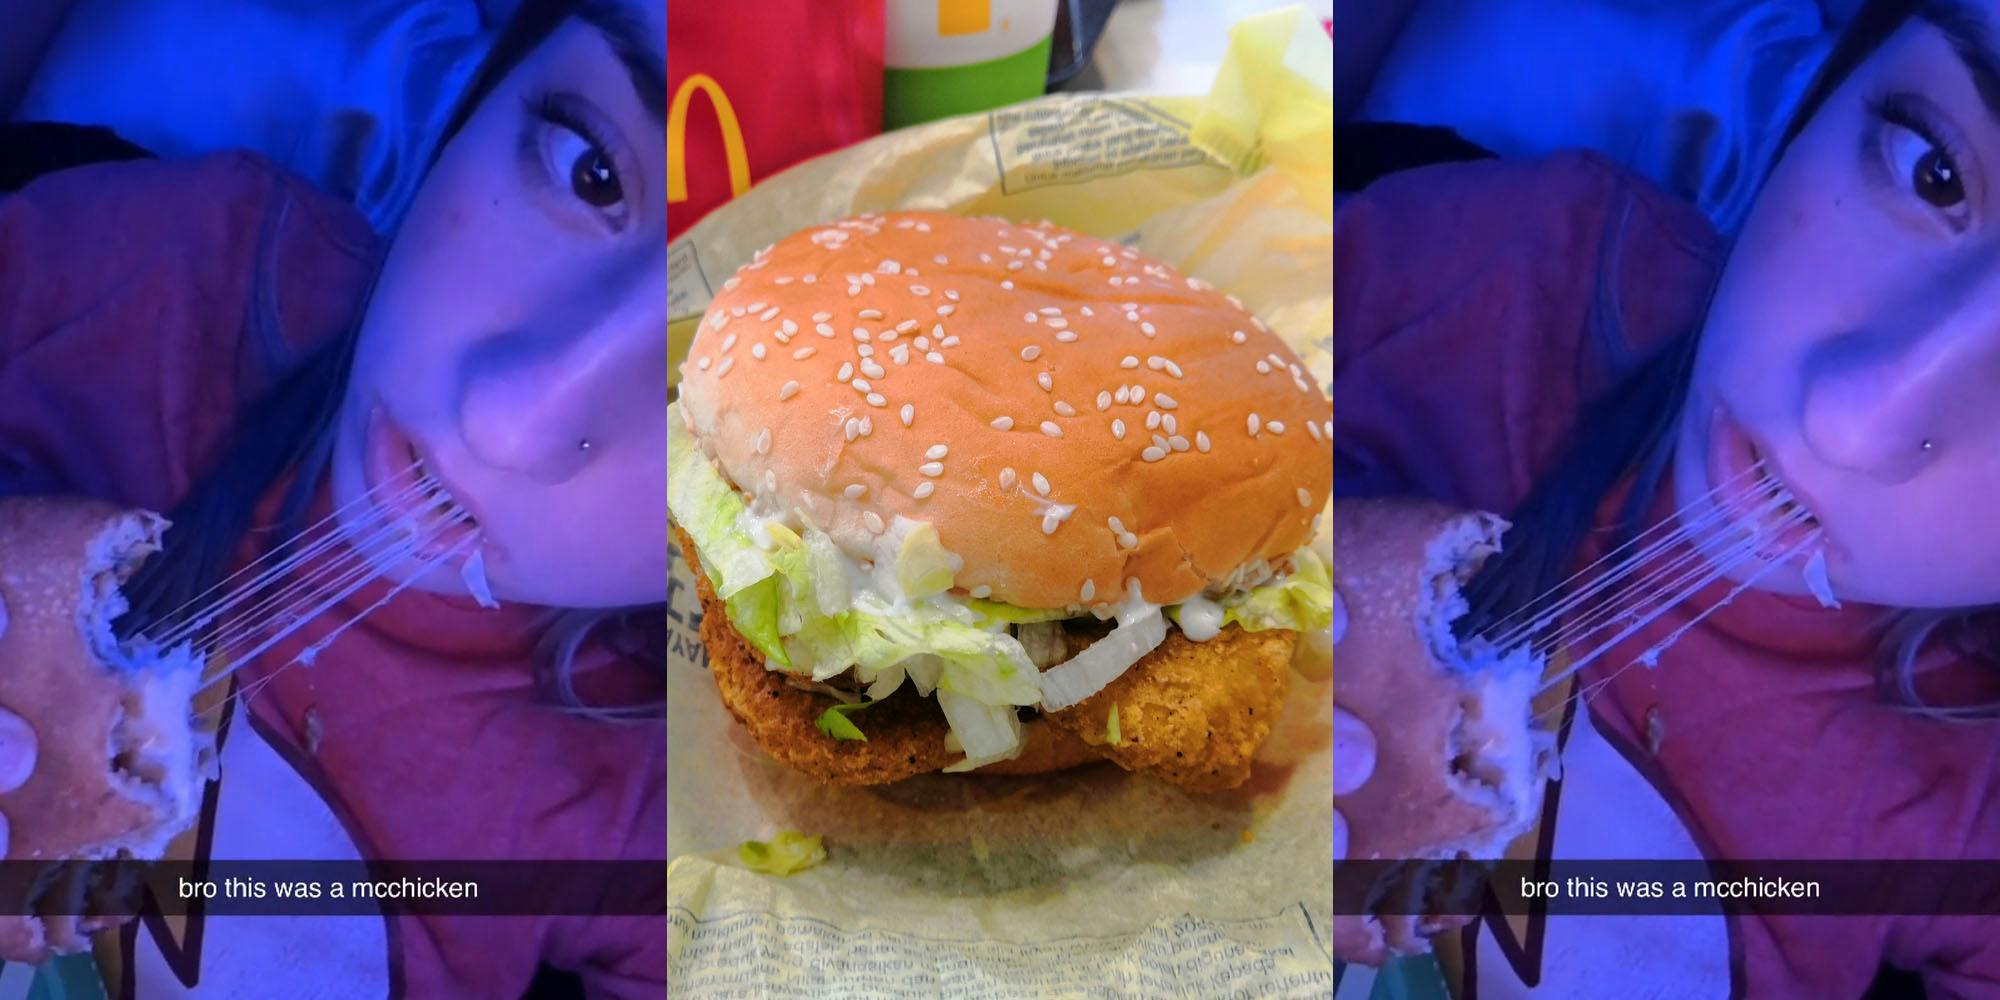 person biting "strings" and pulling them with teeth from McChicken with caption "bro this was a mcchicken" (l) McChicken on packaging (c) person biting "strings" and pulling them with teeth from McChicken with caption "bro this was a mcchicken" (r)